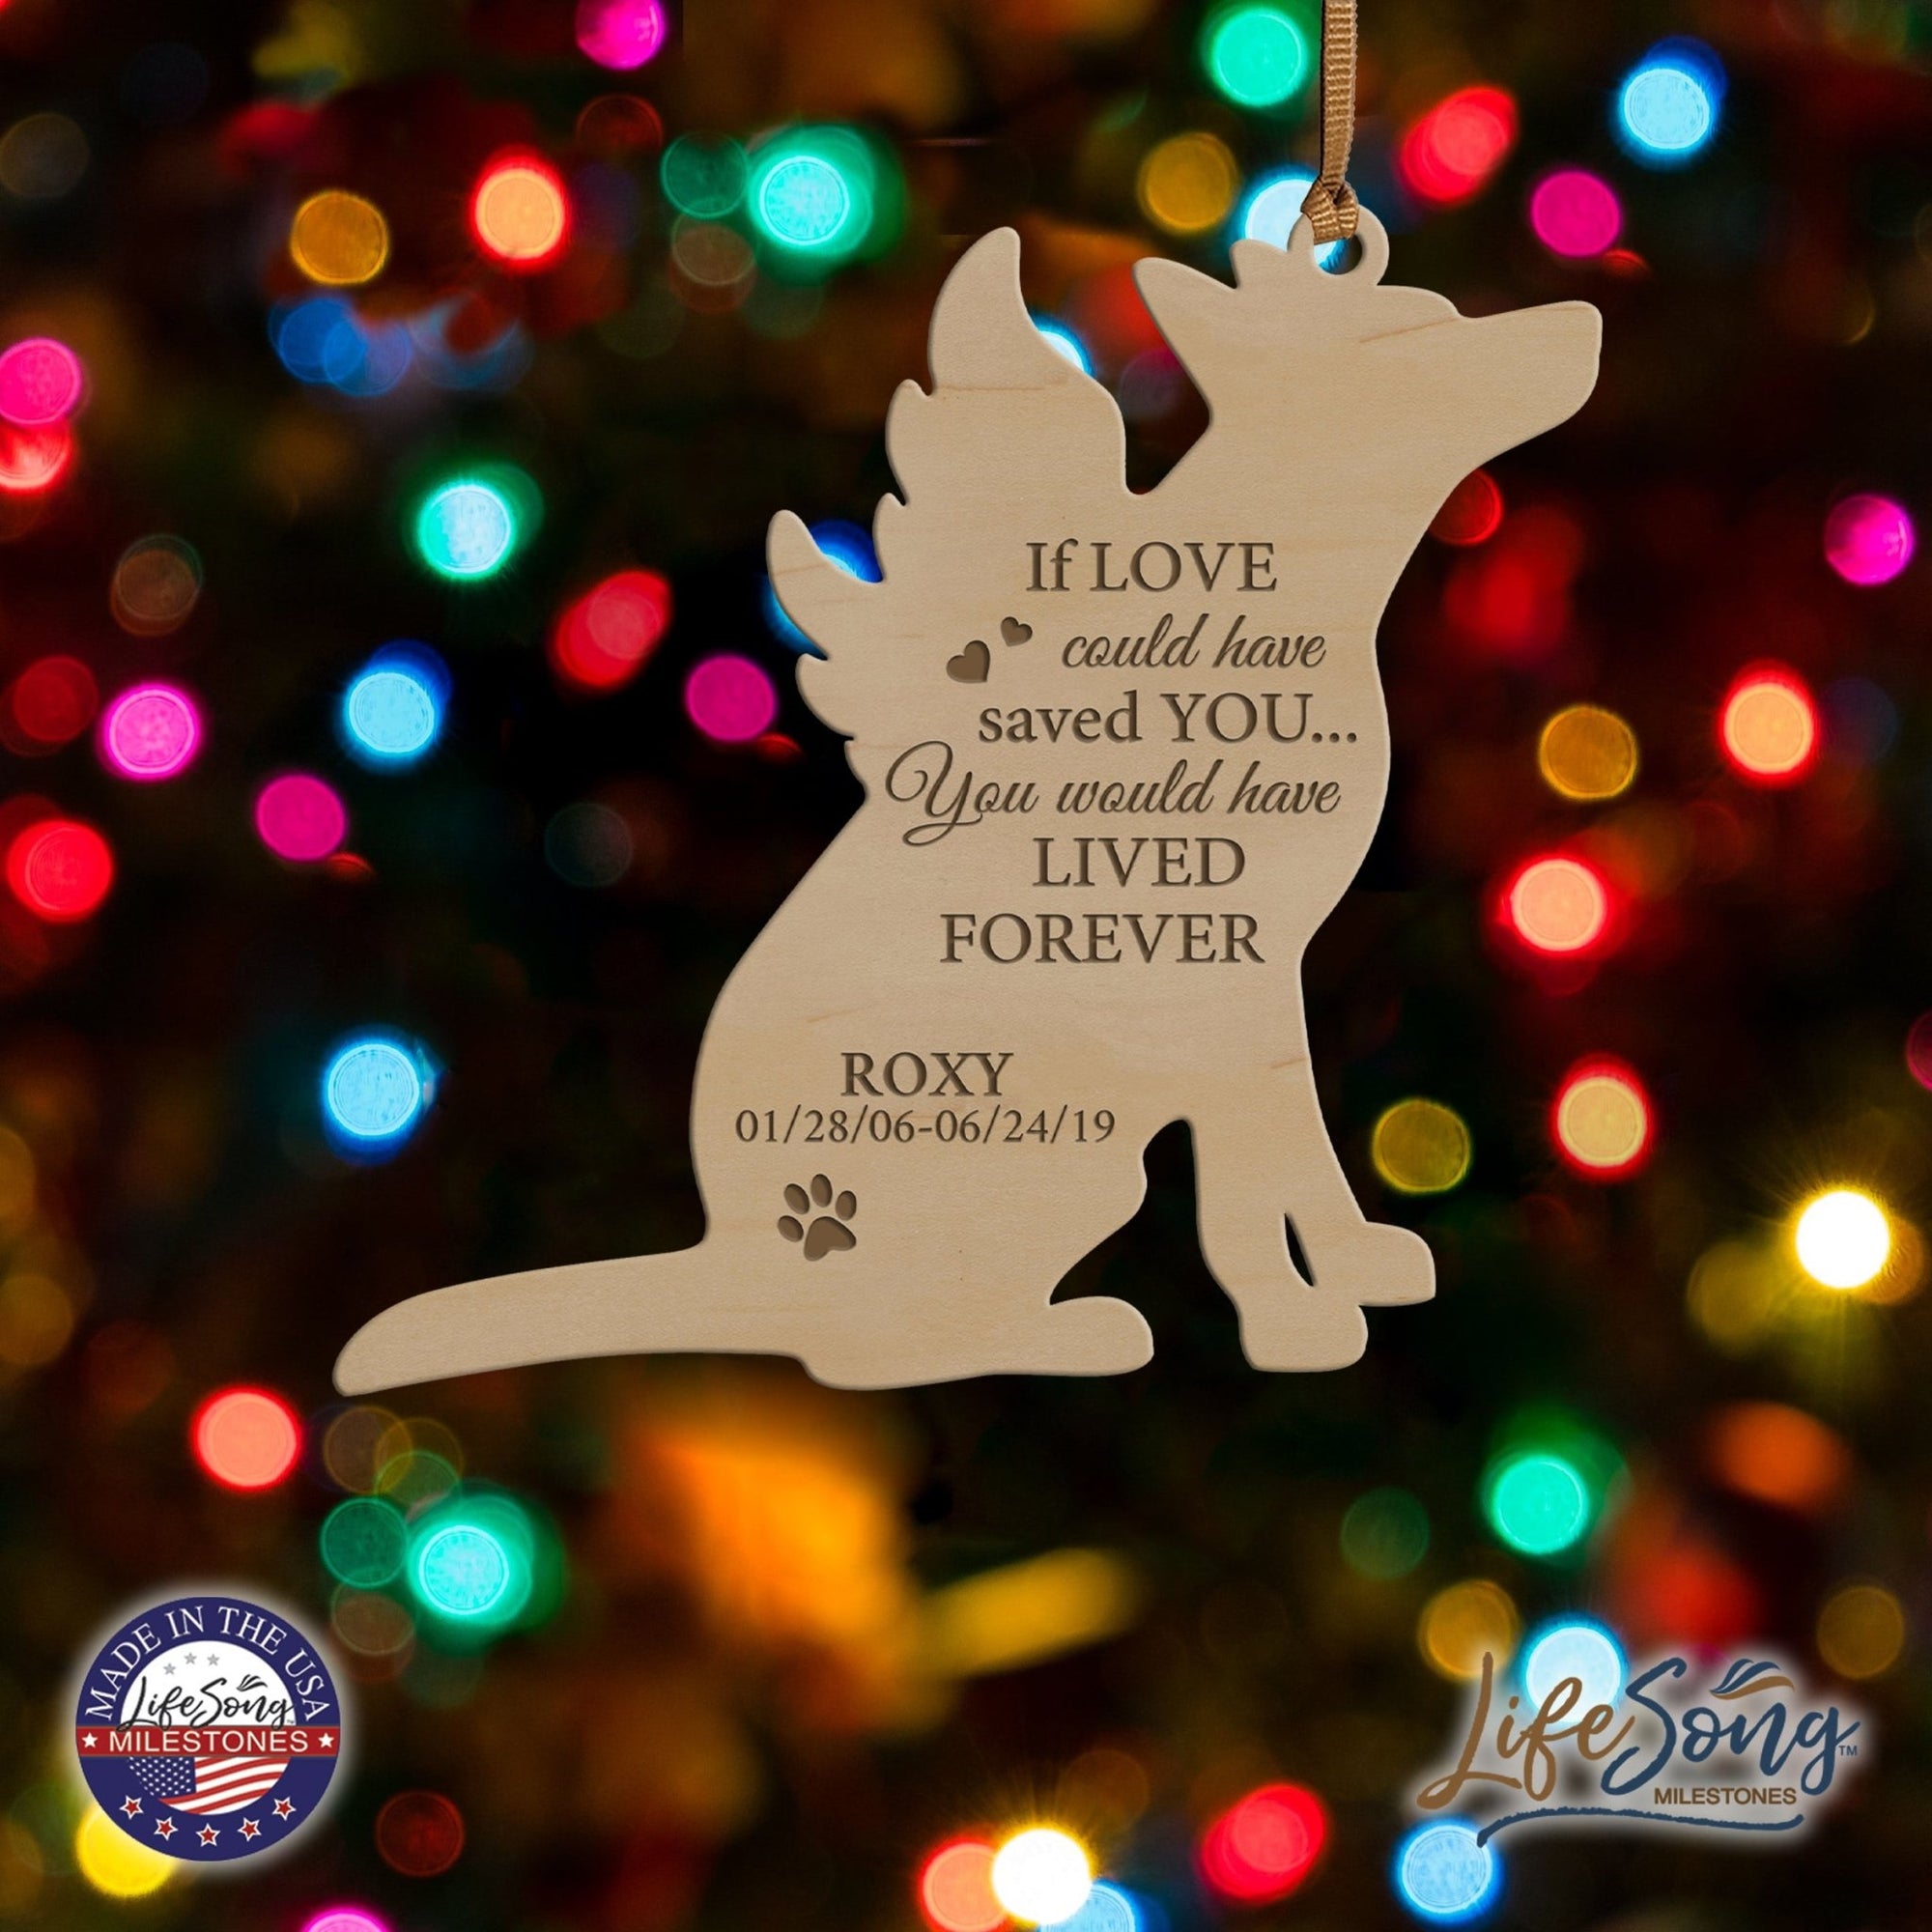 Personalized Engraved Memorial Dog Ornament 4.9375” x 5.375” x 0.125” - If love could have saved you (SCRIPT) - LifeSong Milestones